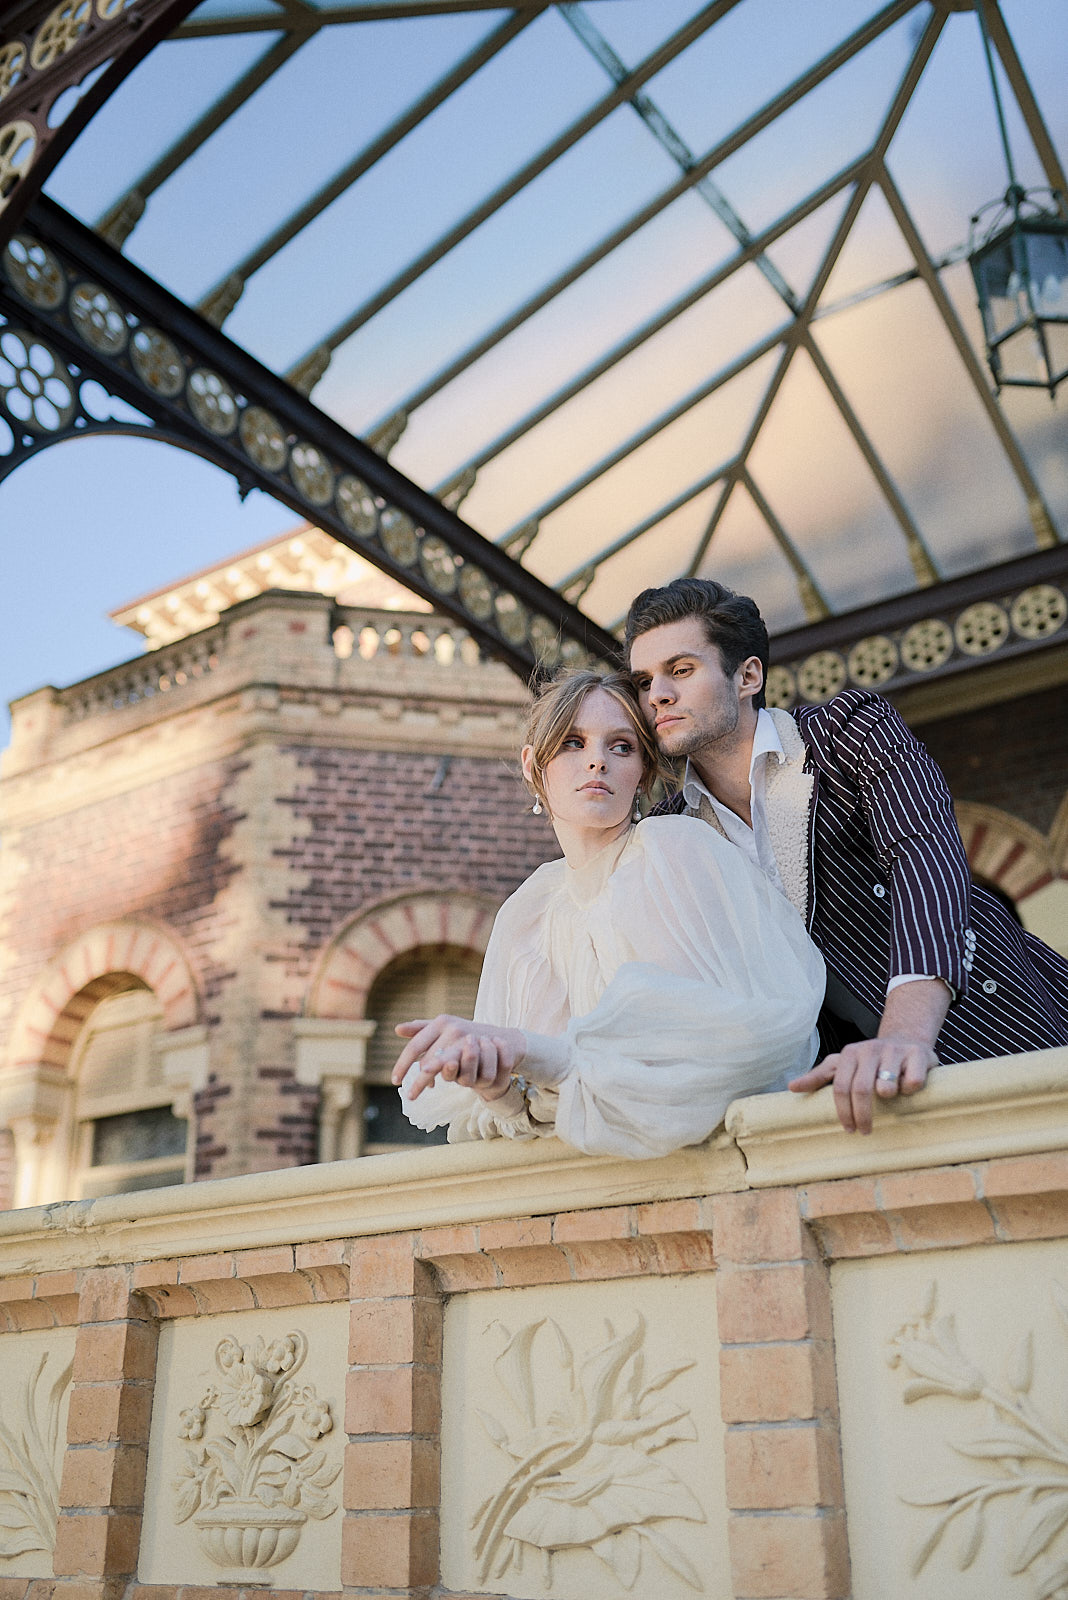 How This Dreamy Victorian Photoshoot Channeled Timeless Romance